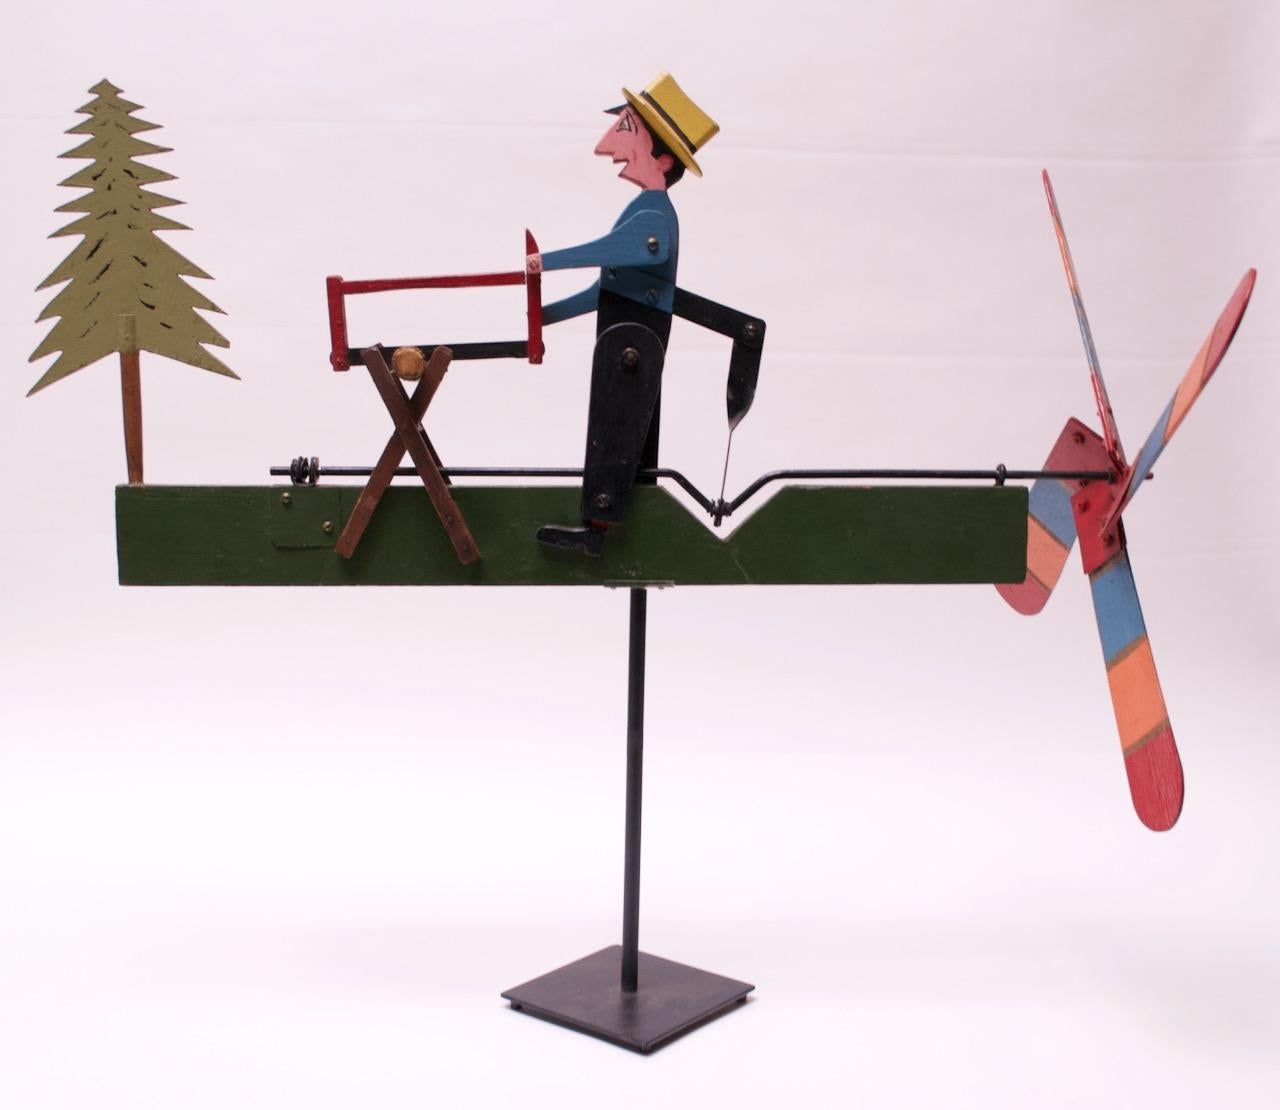 Whimsical whirligig depicting a woodsman sawing a log mounted to a black painted metal stem / base. Hand carved, painted, and assembled with applied facial details. When manually turned, the propeller activates the woodman's 'sawing' motion. The